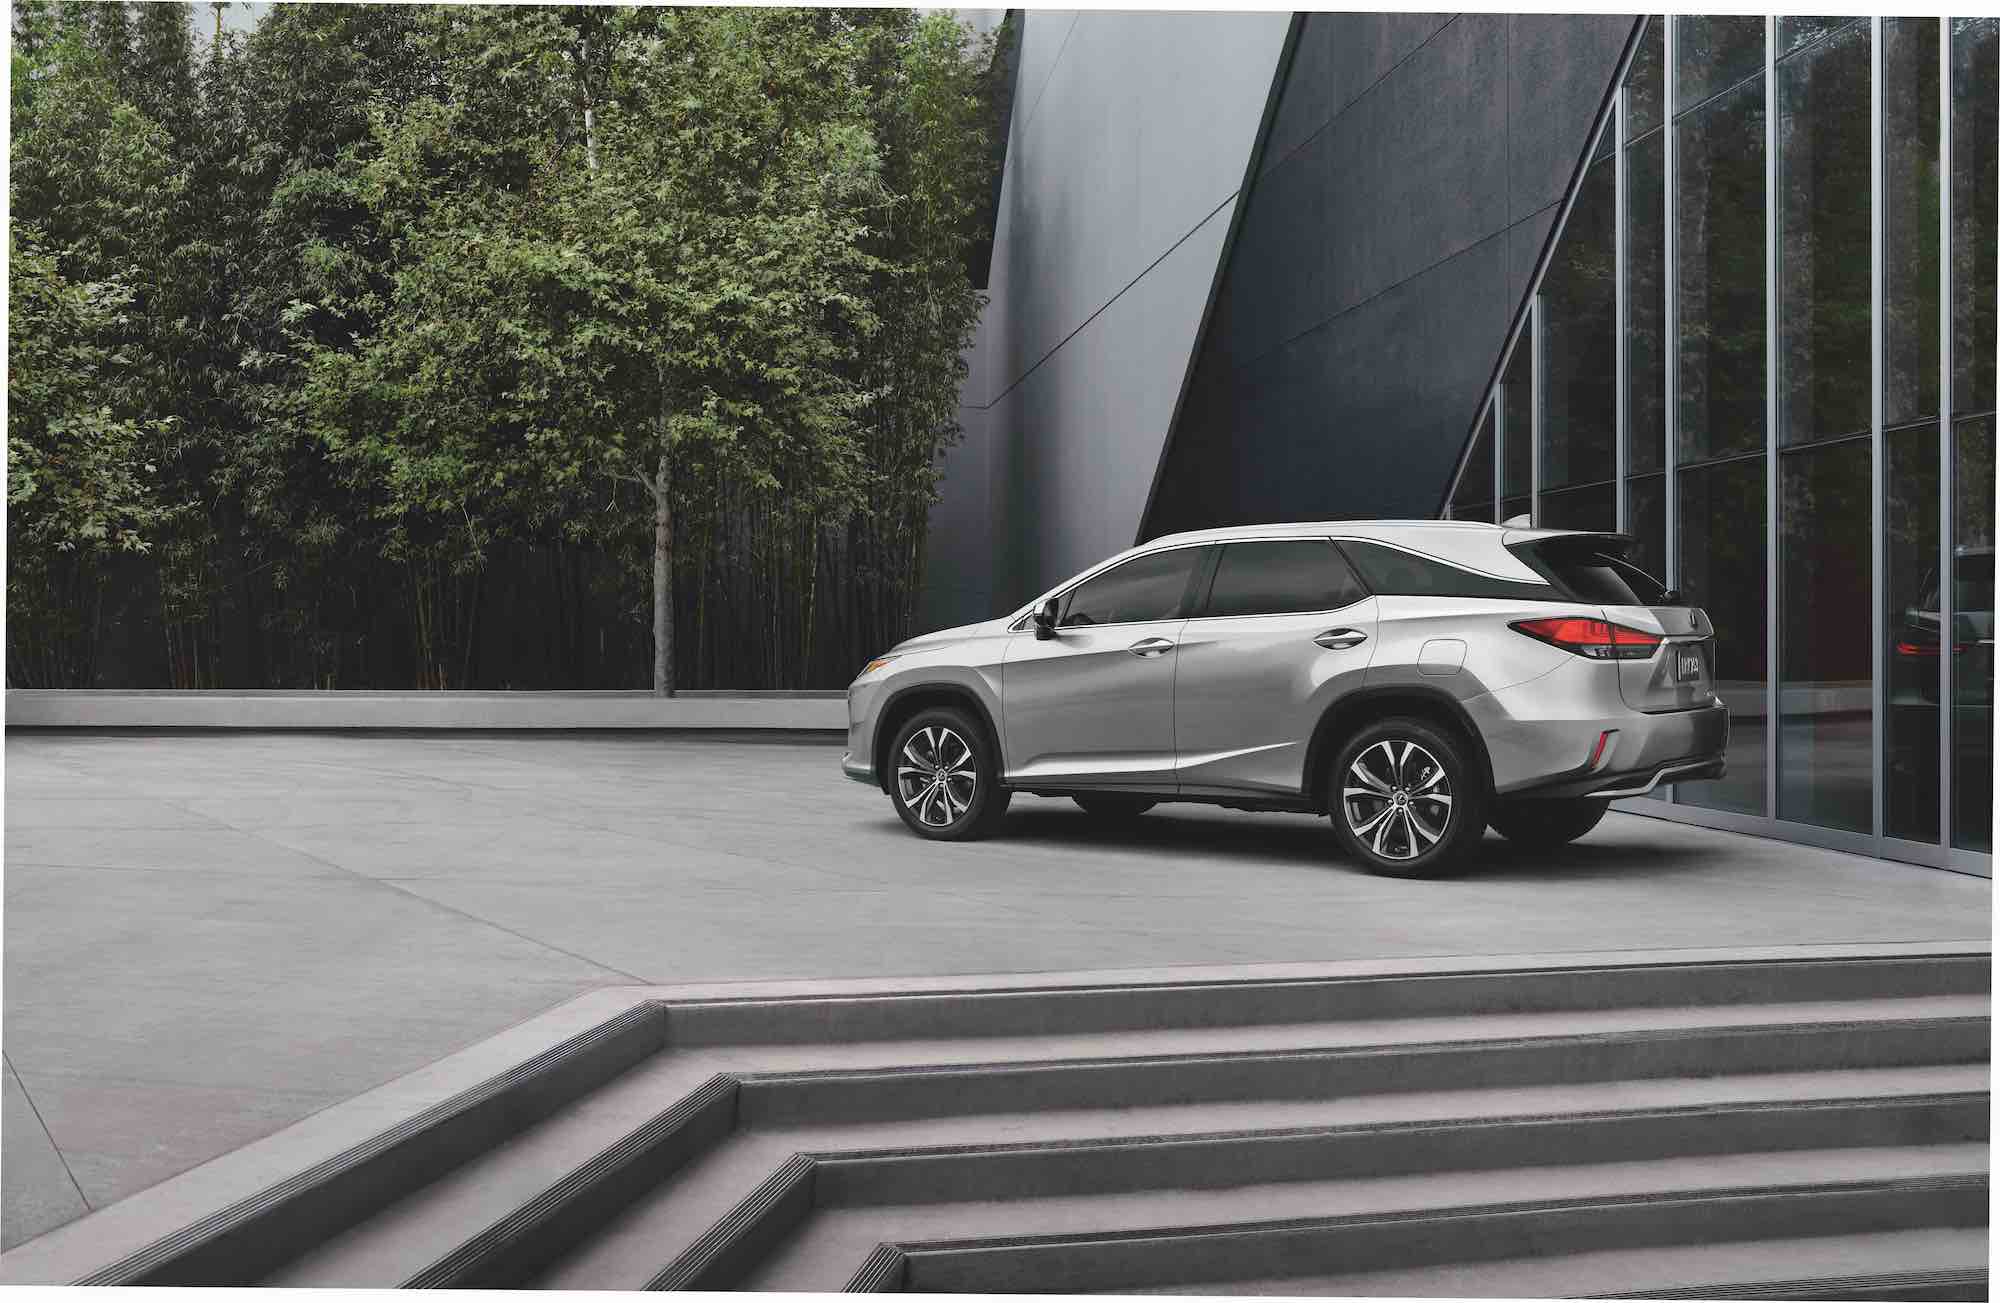 A silver 2021 Lexus RX L midsize luxury SUV parked at the top of some concrete steps next to a modern building and trees